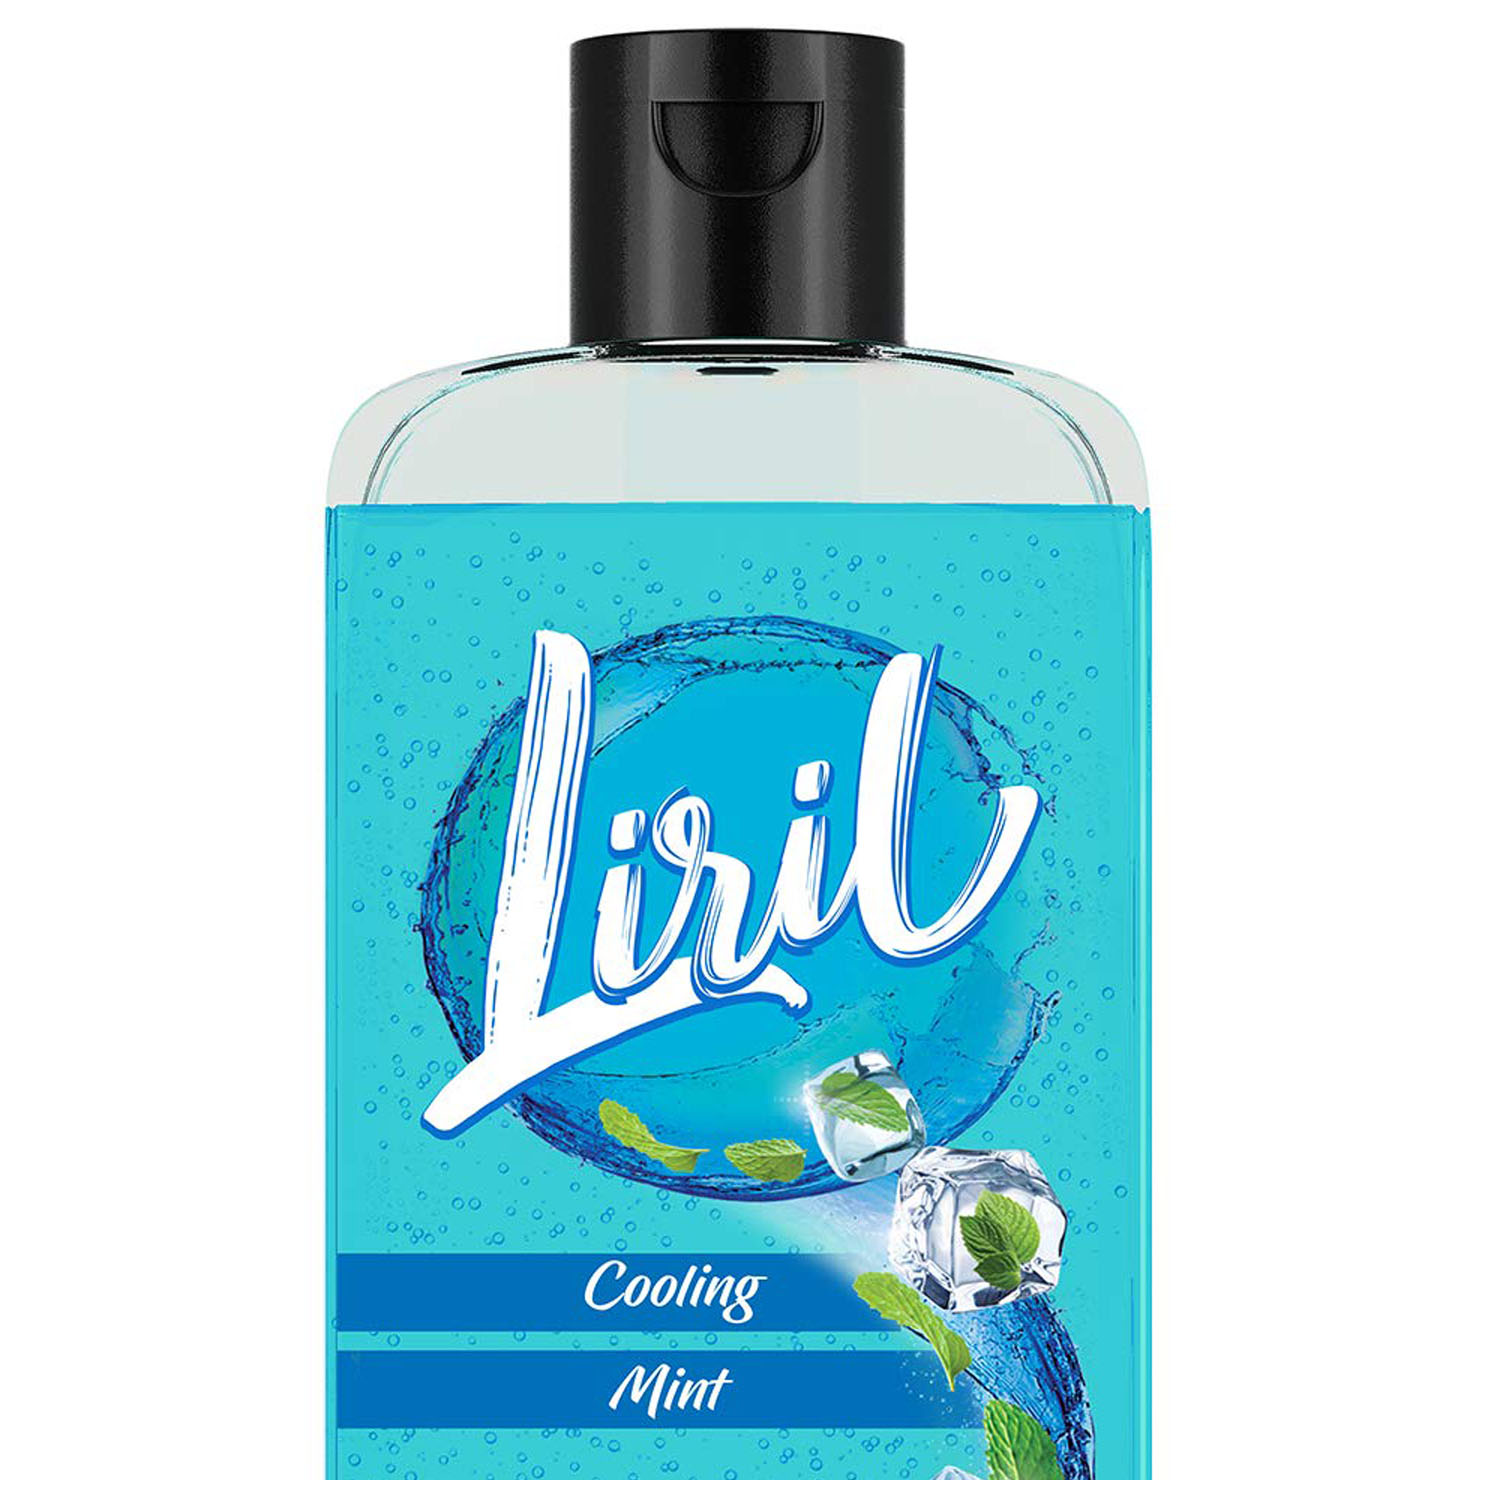 liril cooling mint 250 ml body wash